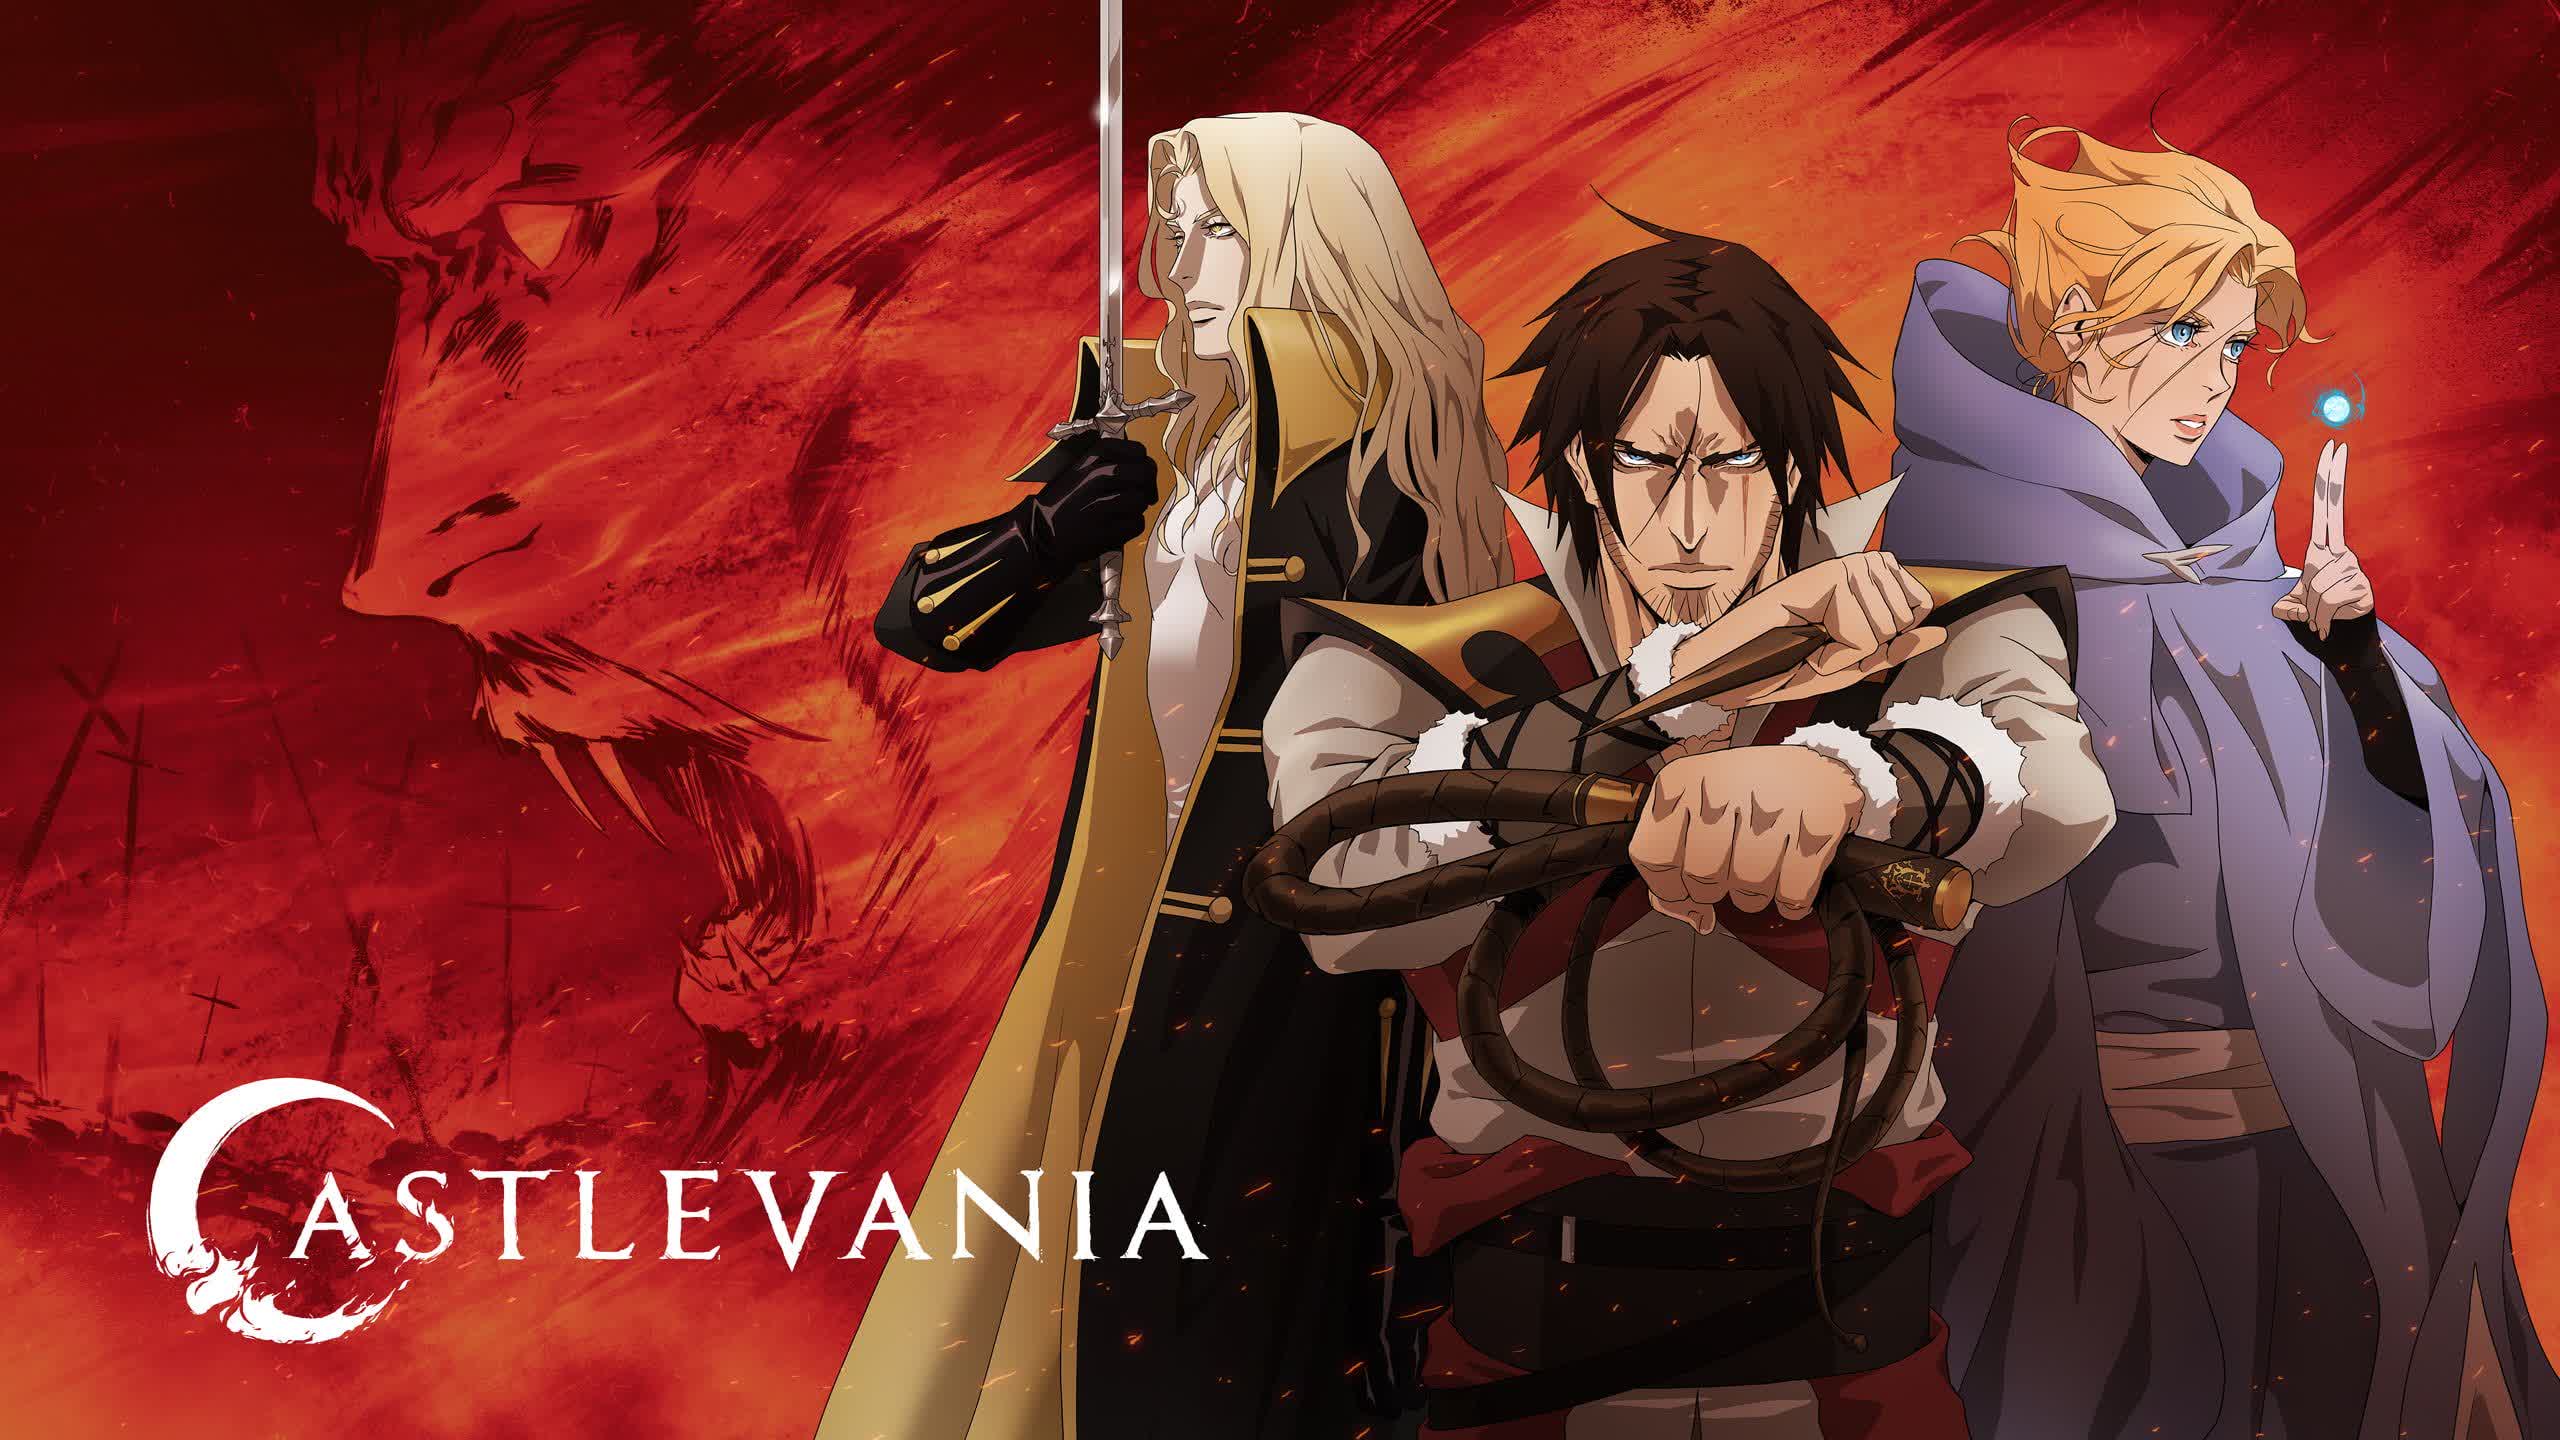 Netflix is ending its Castlevania animated series, but a new show in the same universe could replace it